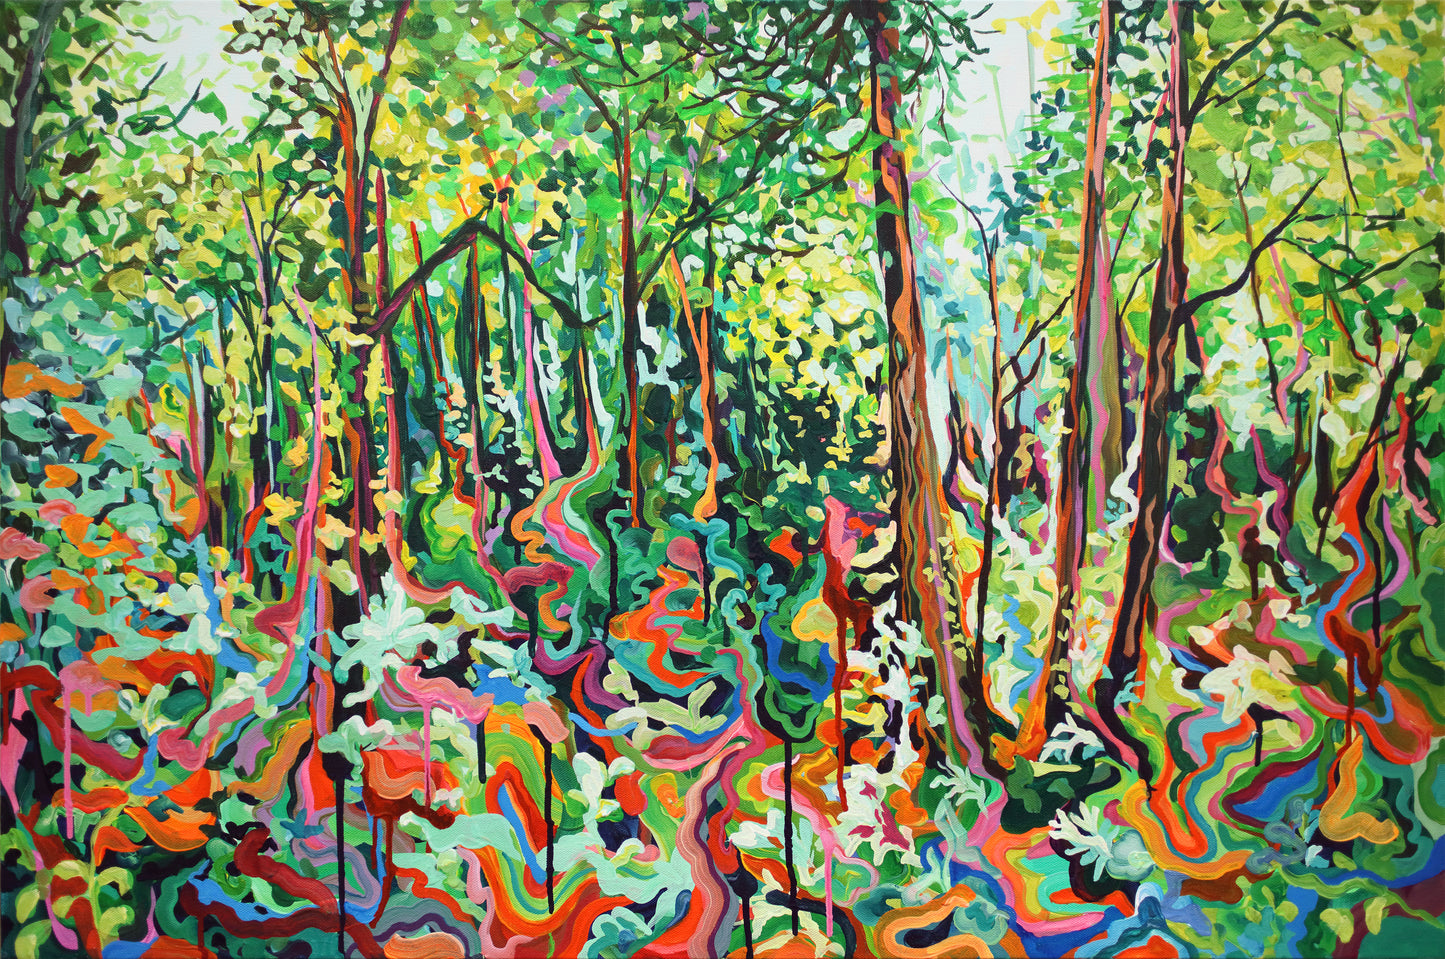 Melting Forest | 24x36